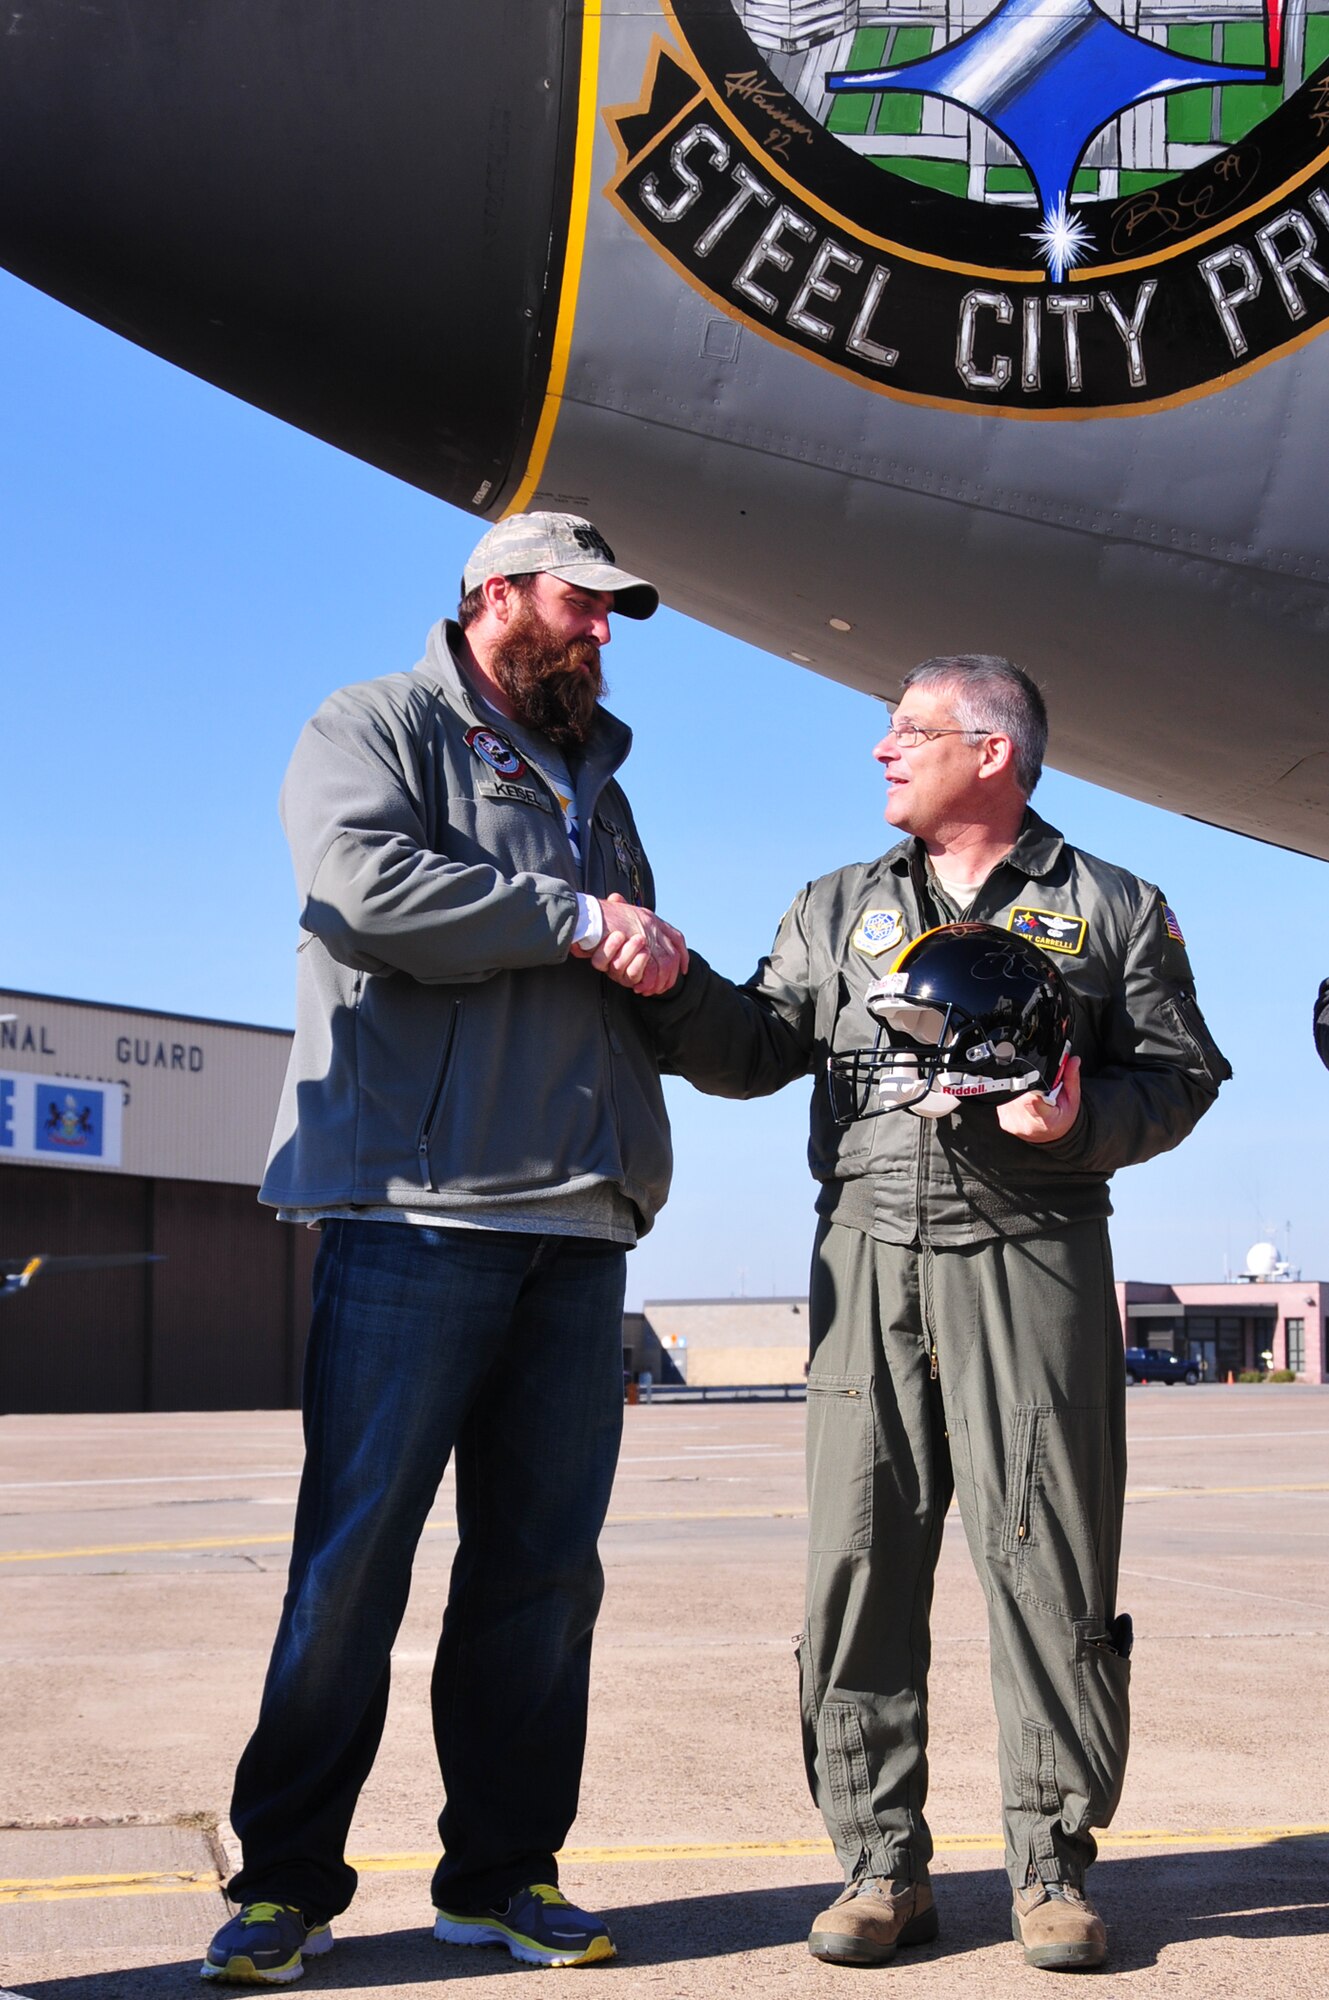 Four players from the Pittsburgh Steelers: Jonathan Dwyer, James Harrison, Brett Keisel and Doug Legursky visit the 171st Air Refueling Wing, November 6.  The visit, part of the "Salute to Service" campaign, is sponsored by the NFL in conjunction with USAA.  The NFL is also paying tribute to the Armed Forces throughout the month of November.  During the visit, the players take time to autograph one of the unit's KC-135 aircraft, Steel City Pride.
	
The Salute to Service campaign aligns with the NFL's long history of supporting America's armed services, including a partnership of more than 45 years with the USO that includes overseas visits to troops and trips to military hospitals nationwide. 

During the Pittsburgh Steelers' November 12 game, the Steelers will honor a veteran from every war, and recognize a local Harrier pilot who was shot down and killed last month over Afghanistan. The Steelers will also recognize their local military community by paying tribute to the service men and women of the 171st Air Refueling Wing. The team is partnering with USAA for a stadium-wide card stunt that features a special military appreciation message during the National Anthem. Fans will be instructed to hold up the card at their seats just before the National Anthem. 

(National Guard photo by Master Sgt. Ann Young/released)
